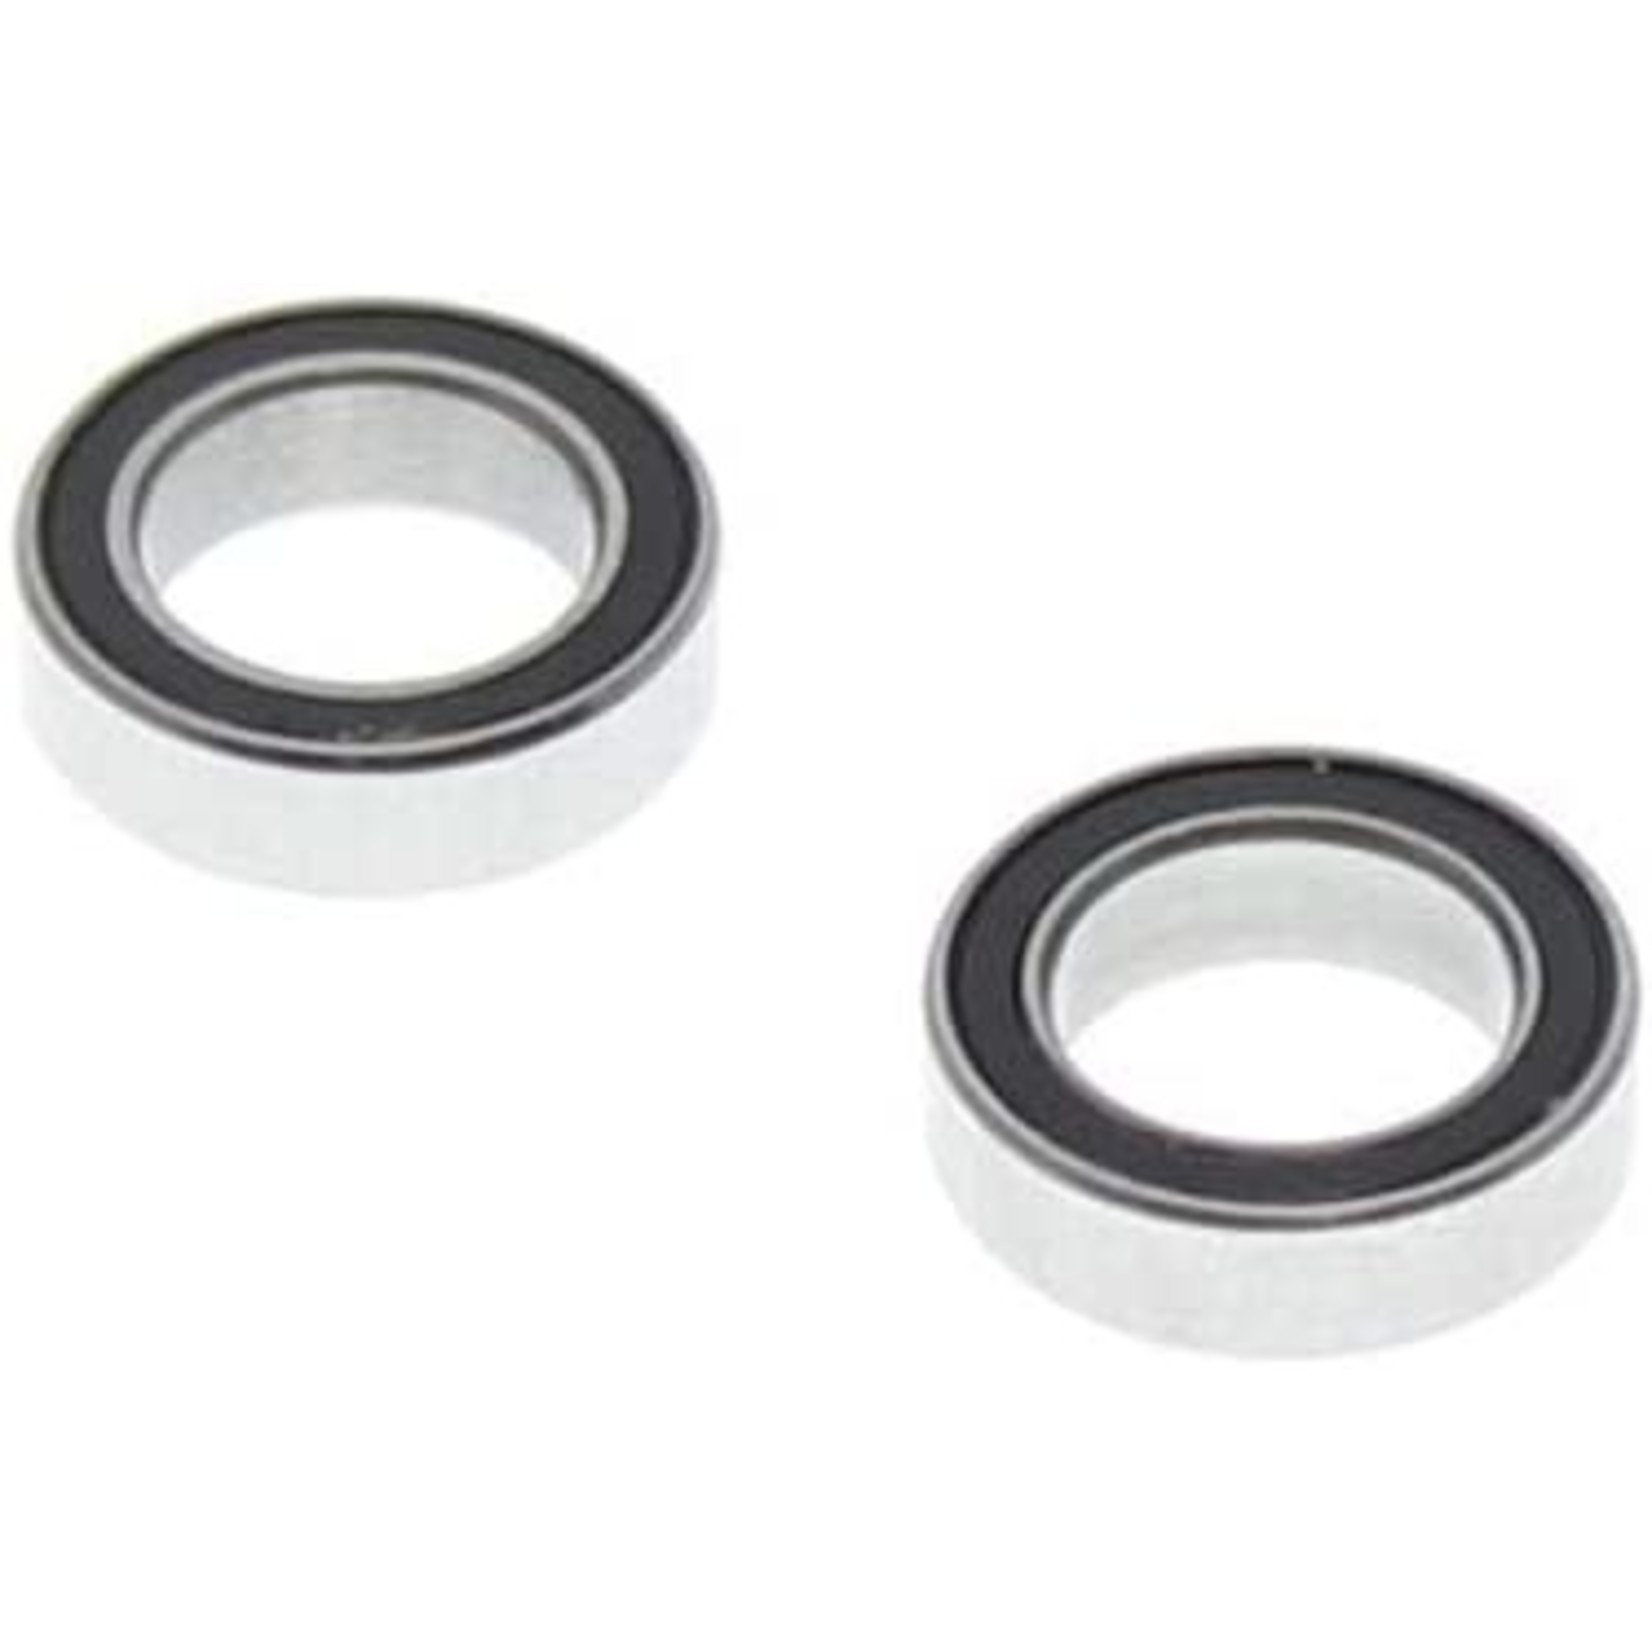 Redcat Racing Redcat Racing 7x11x3mm Rubber Sealed Ball Bearings (2pc) #RER11369